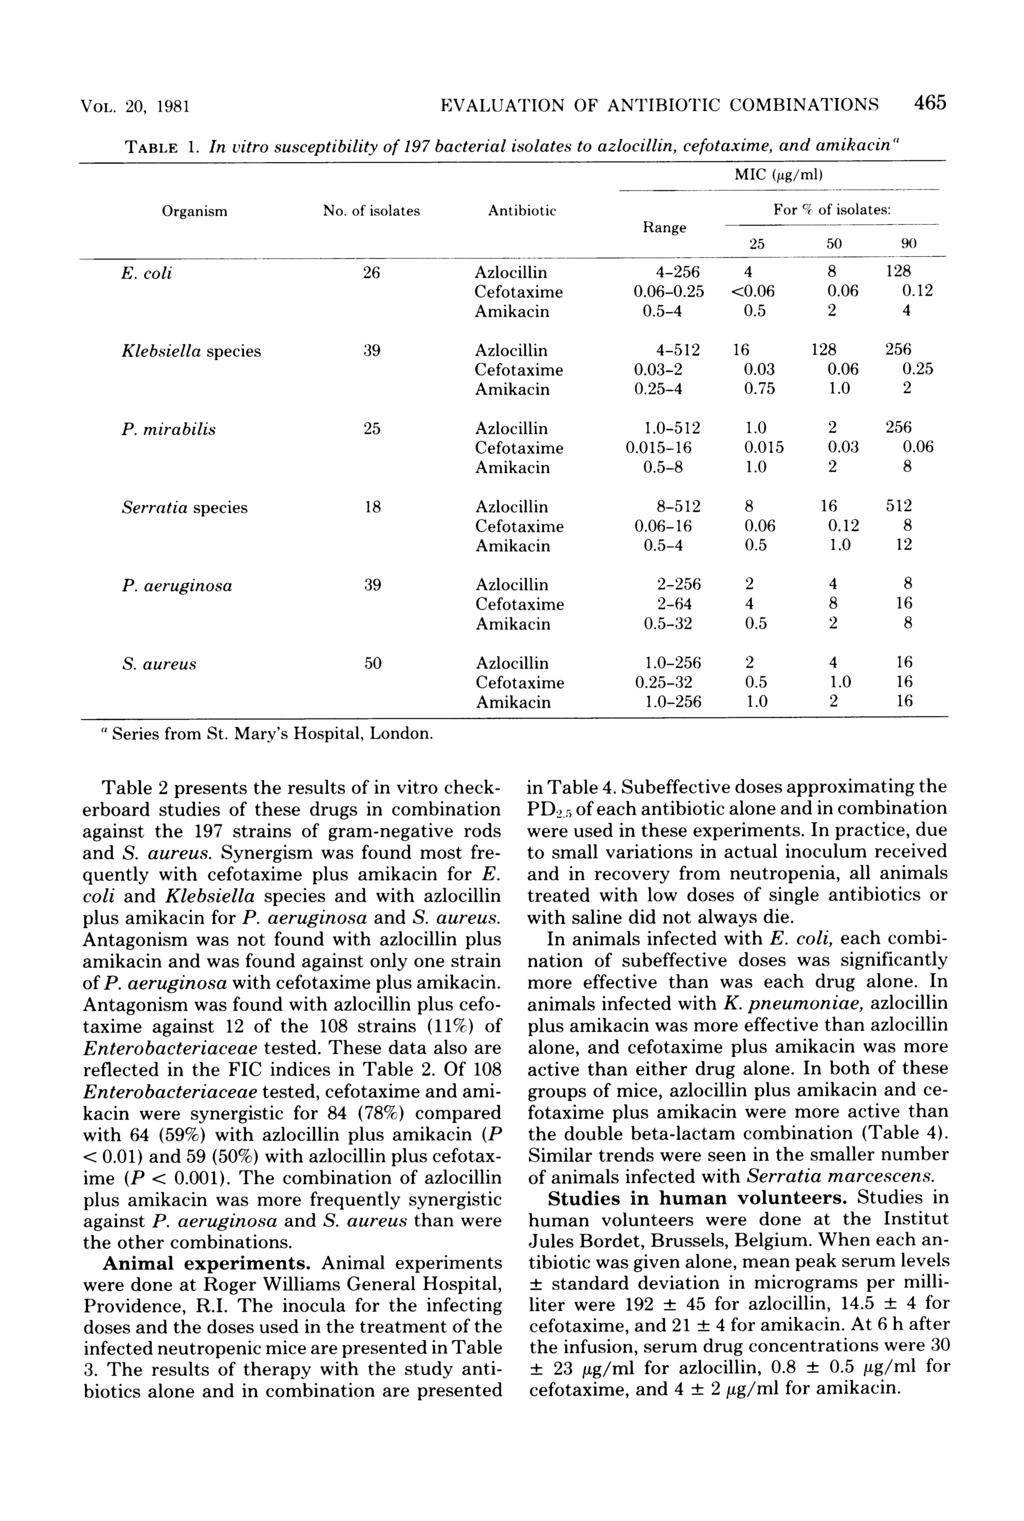 VOL. VEVALUATION 20, 1981 OF ANTIBIOTIC COMBINATIONS 465 TABLE 1. In vitro susceptibility of 197 bacterial isolates to azlocillin, cefotaxime, and amikacin" MIC ([g/ml) Organism No.